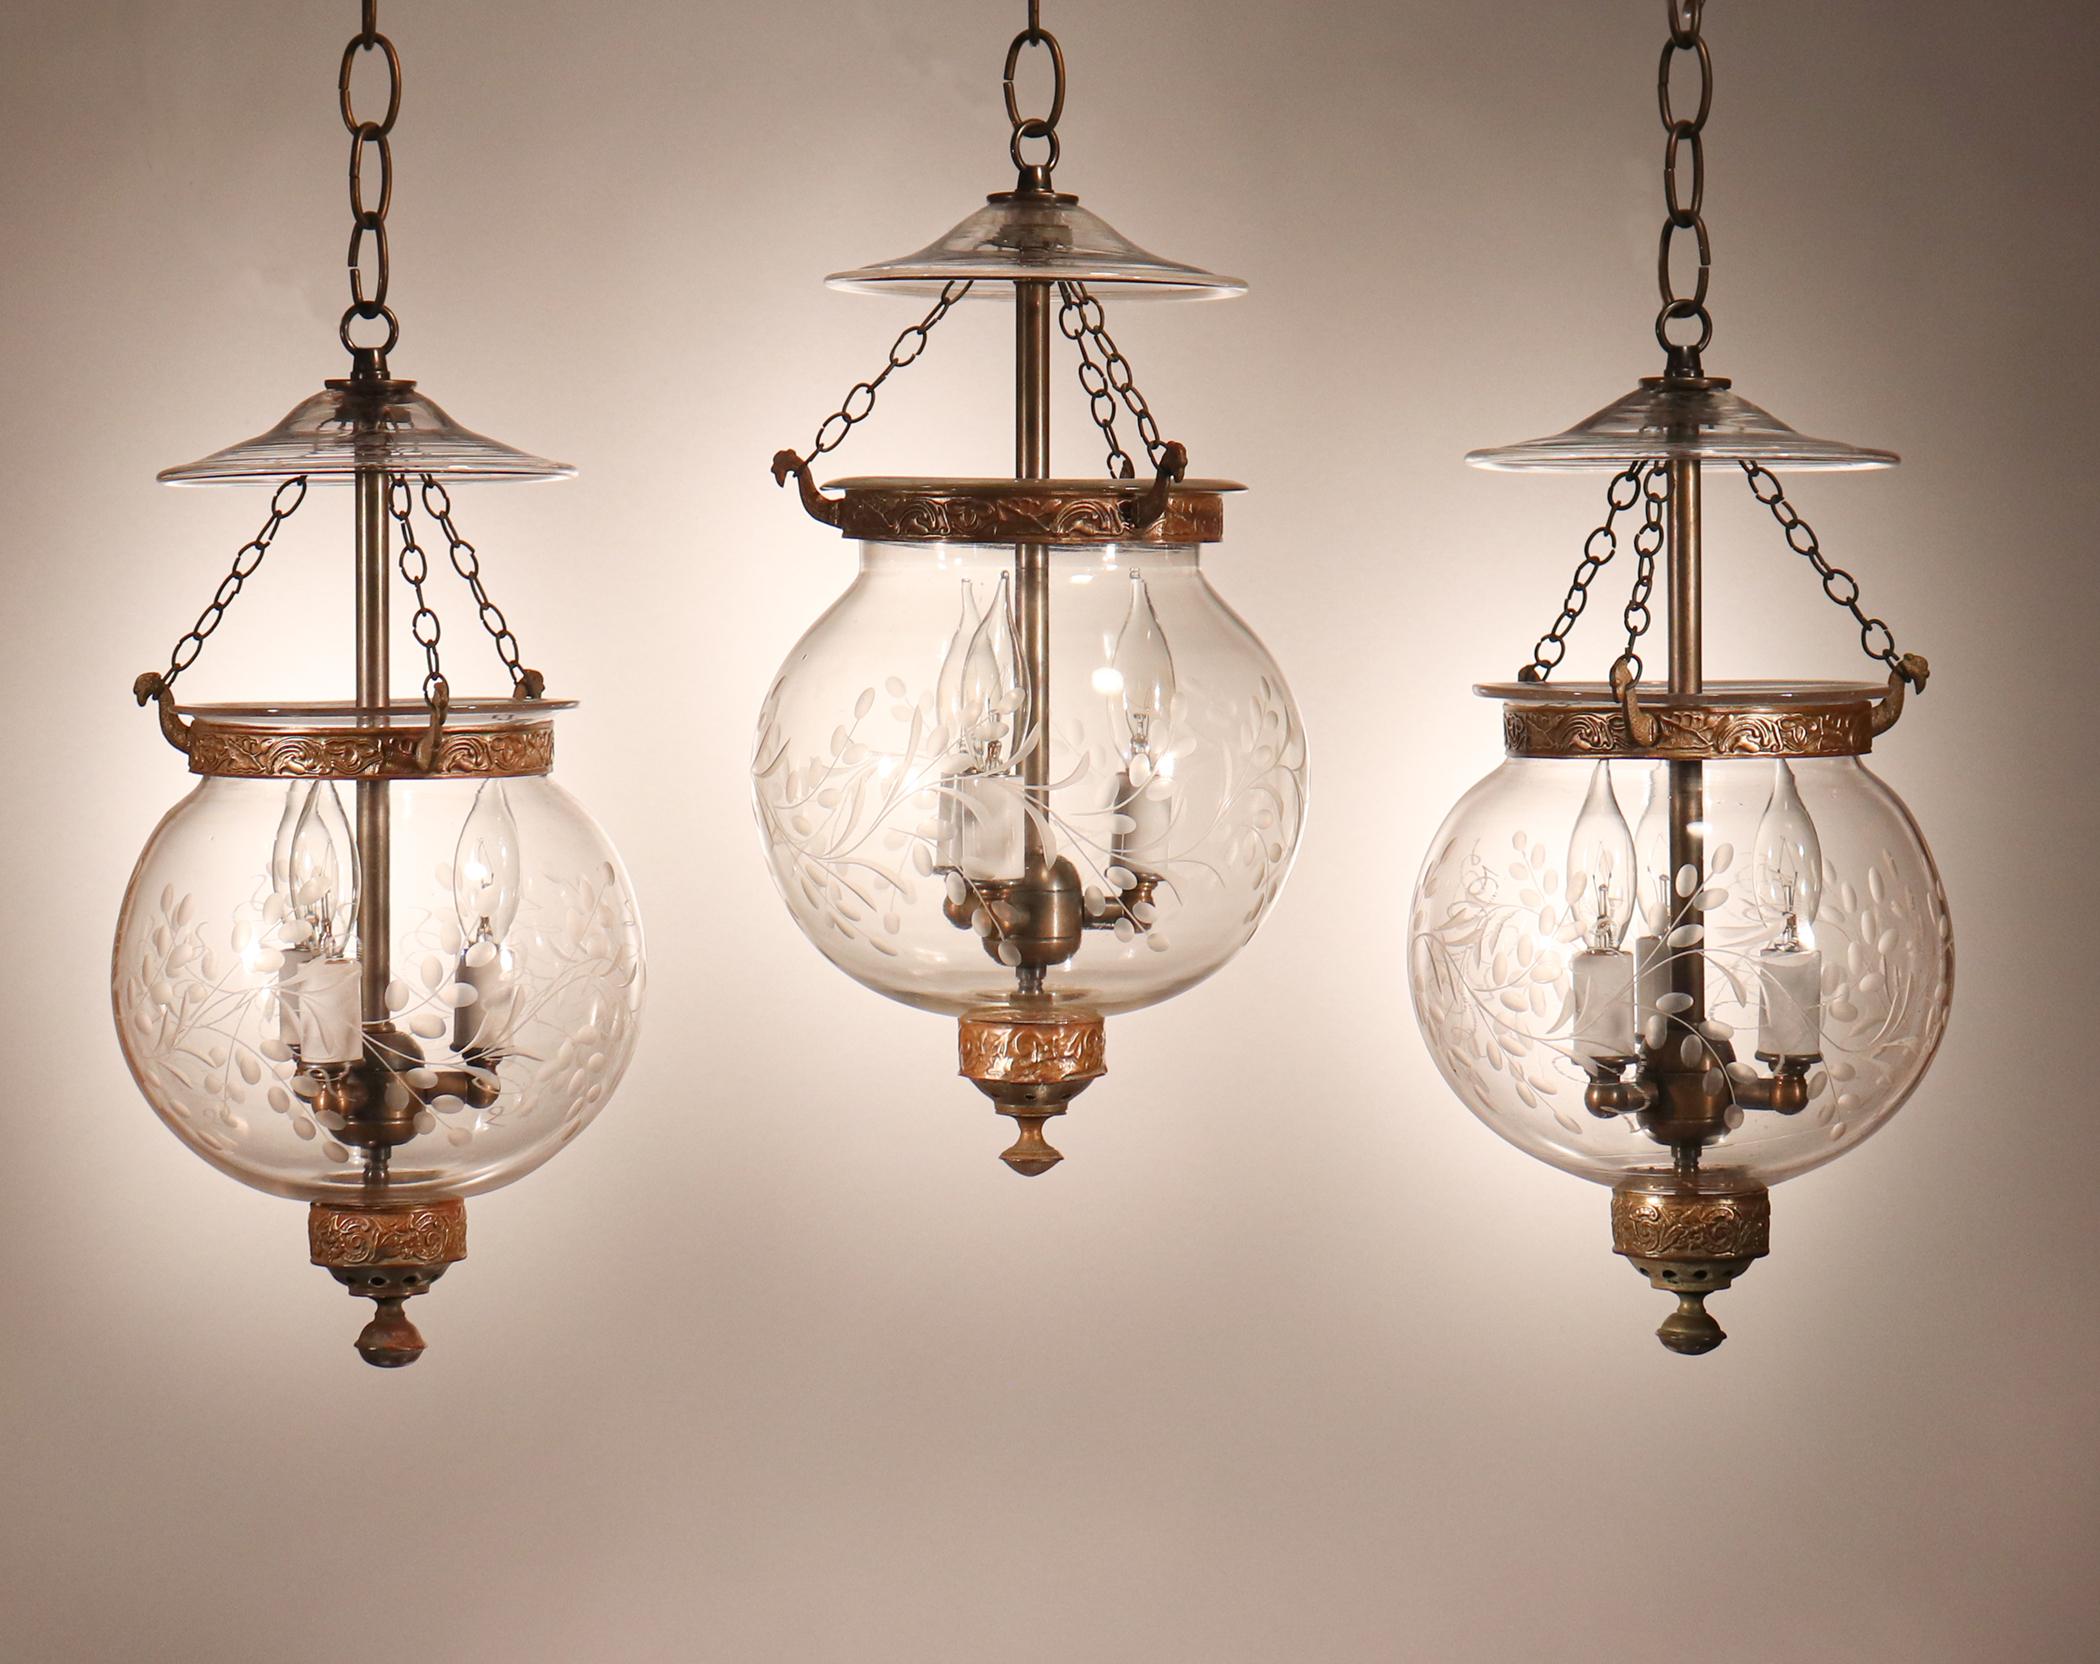 A rare find, this suite of three circa 1880 English globe lanterns feature superb quality hand blown glass replete with desirable air bubbles and swirls. The antique globes feature a finely etched vine motif. Note that there is a very slight